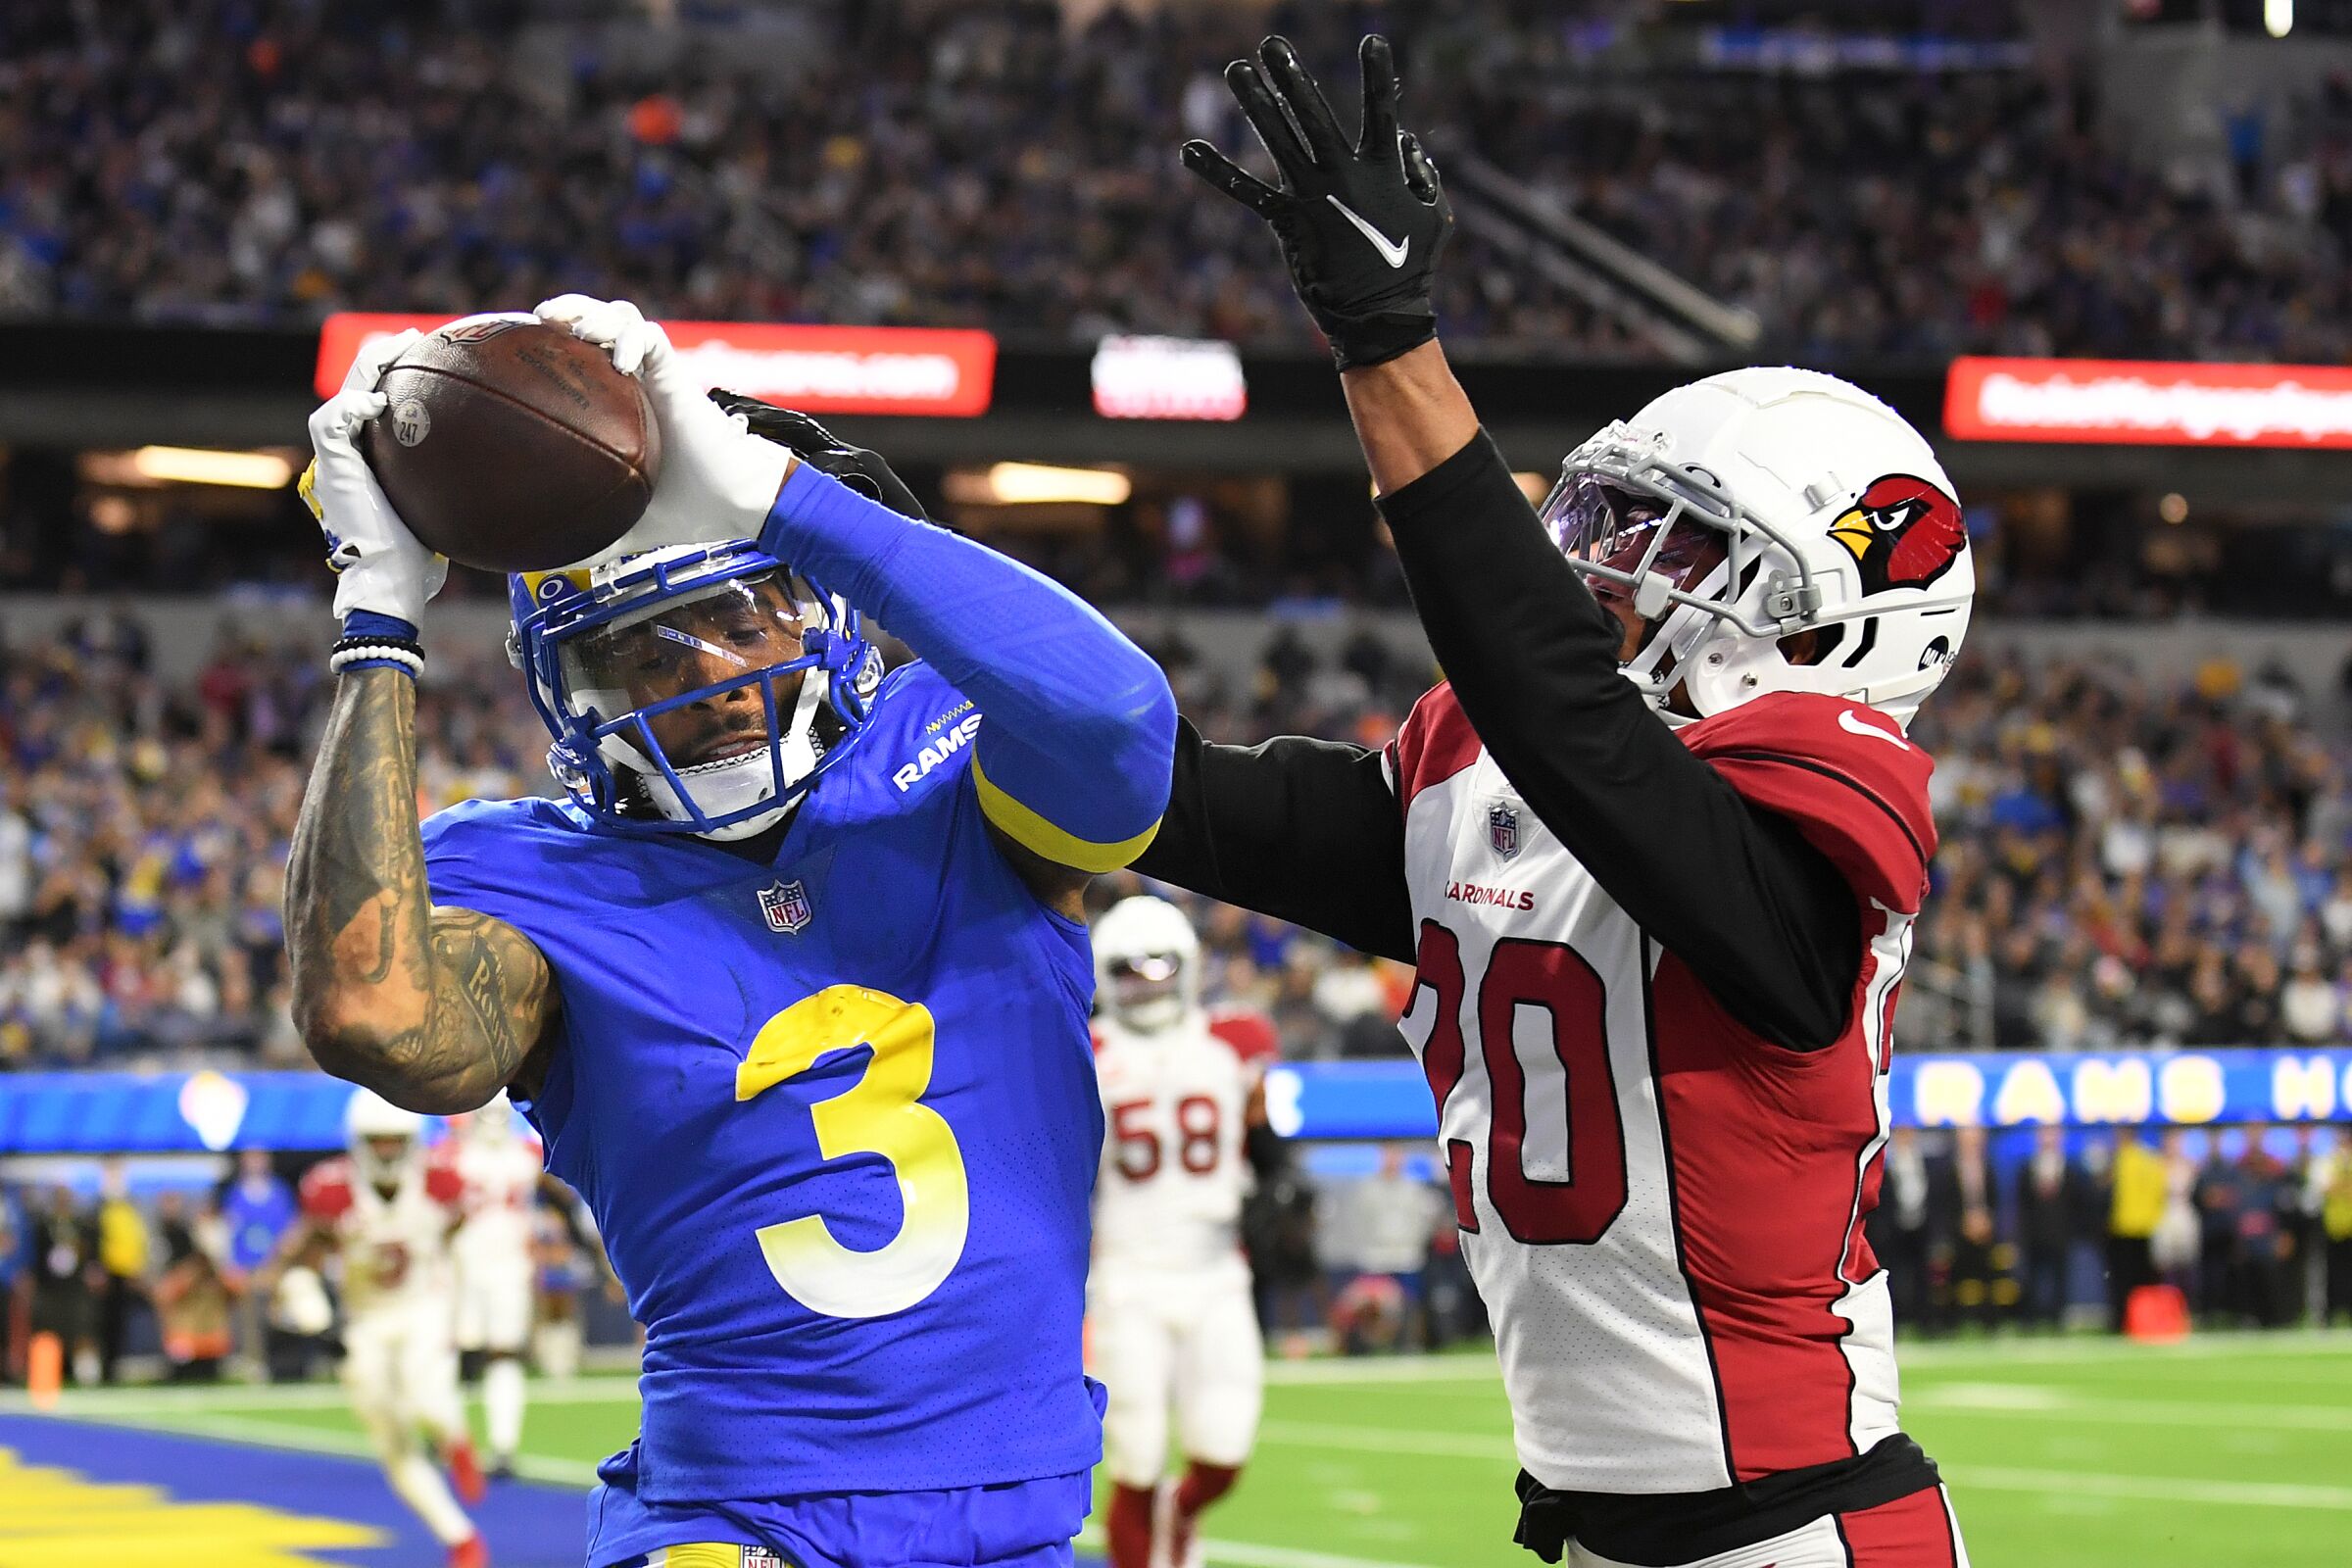 Rams receiver Odell Beckham Jr. pulls in touchdown catch in front of Cardinals cornerback Marco Wilson